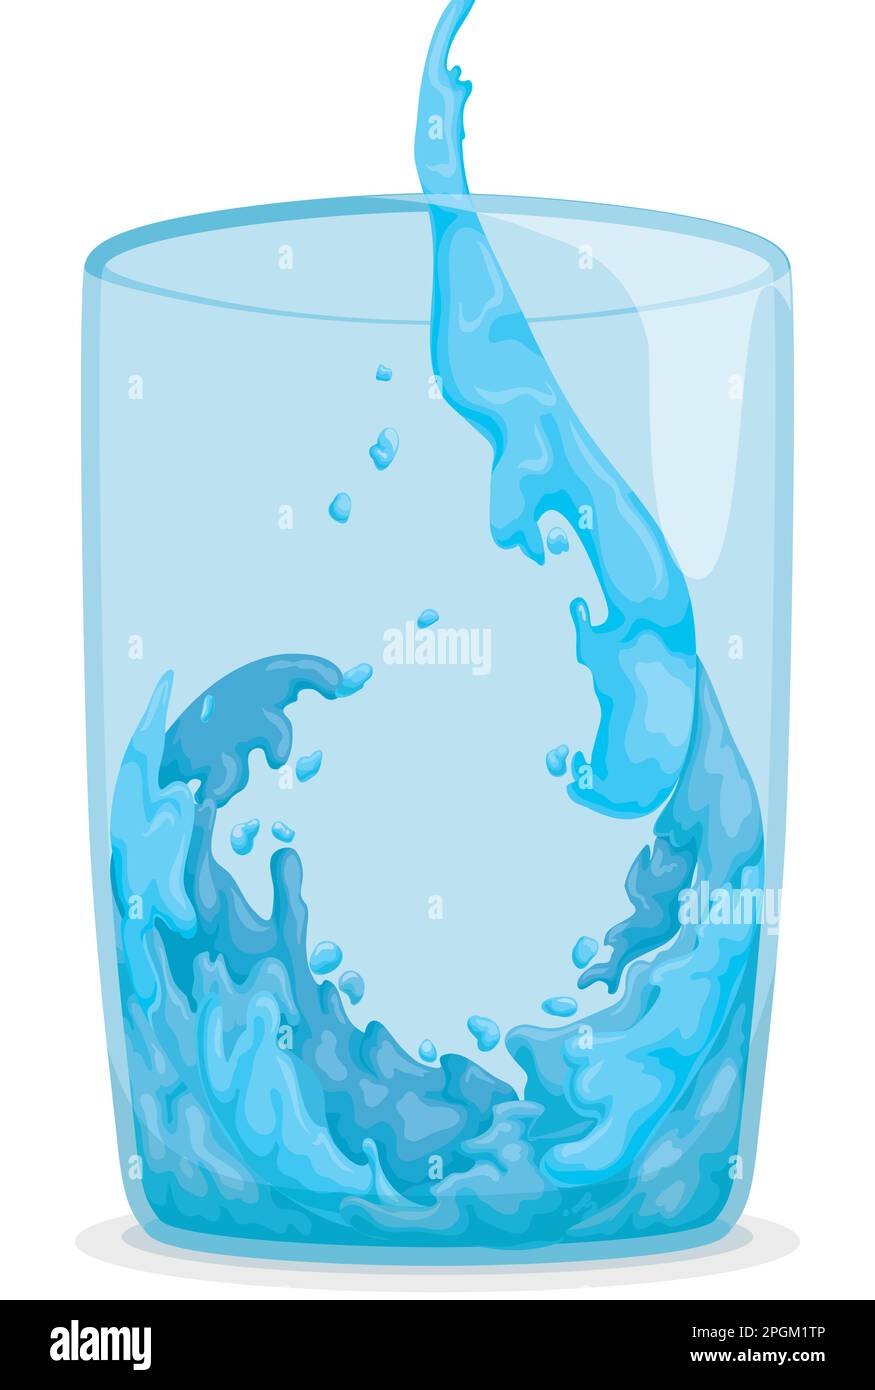 https://c8.alamy.com/comp/2PGM1TP/isolated-glass-cup-filling-with-a-stream-of-water-cartoon-style-design-2PGM1TP.jpg